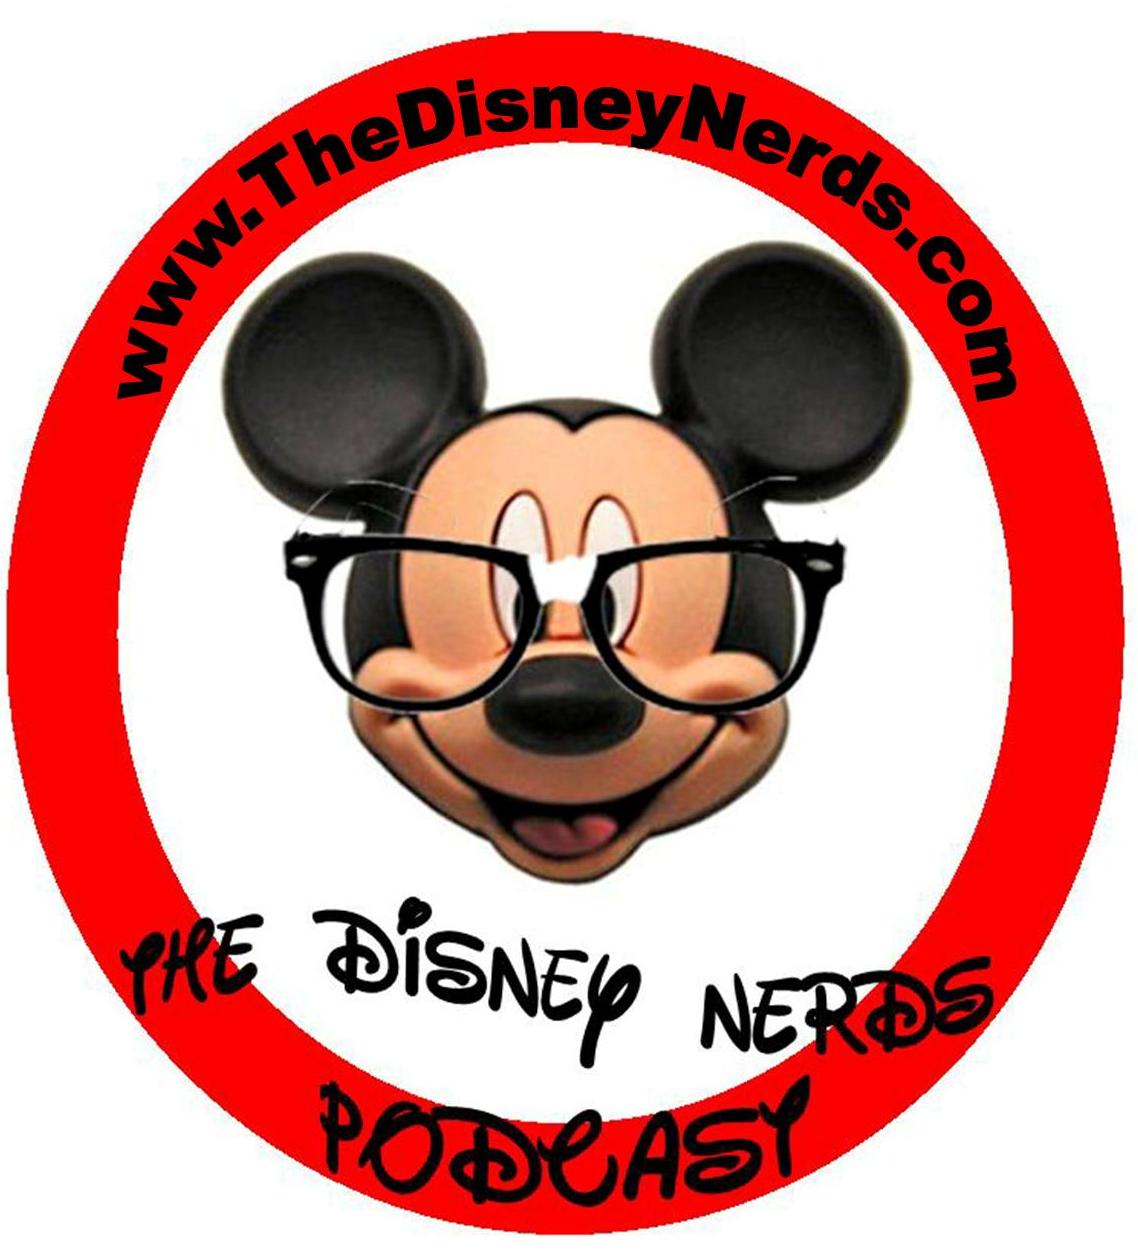 Show # 35 of the Disney Nerds Podcast